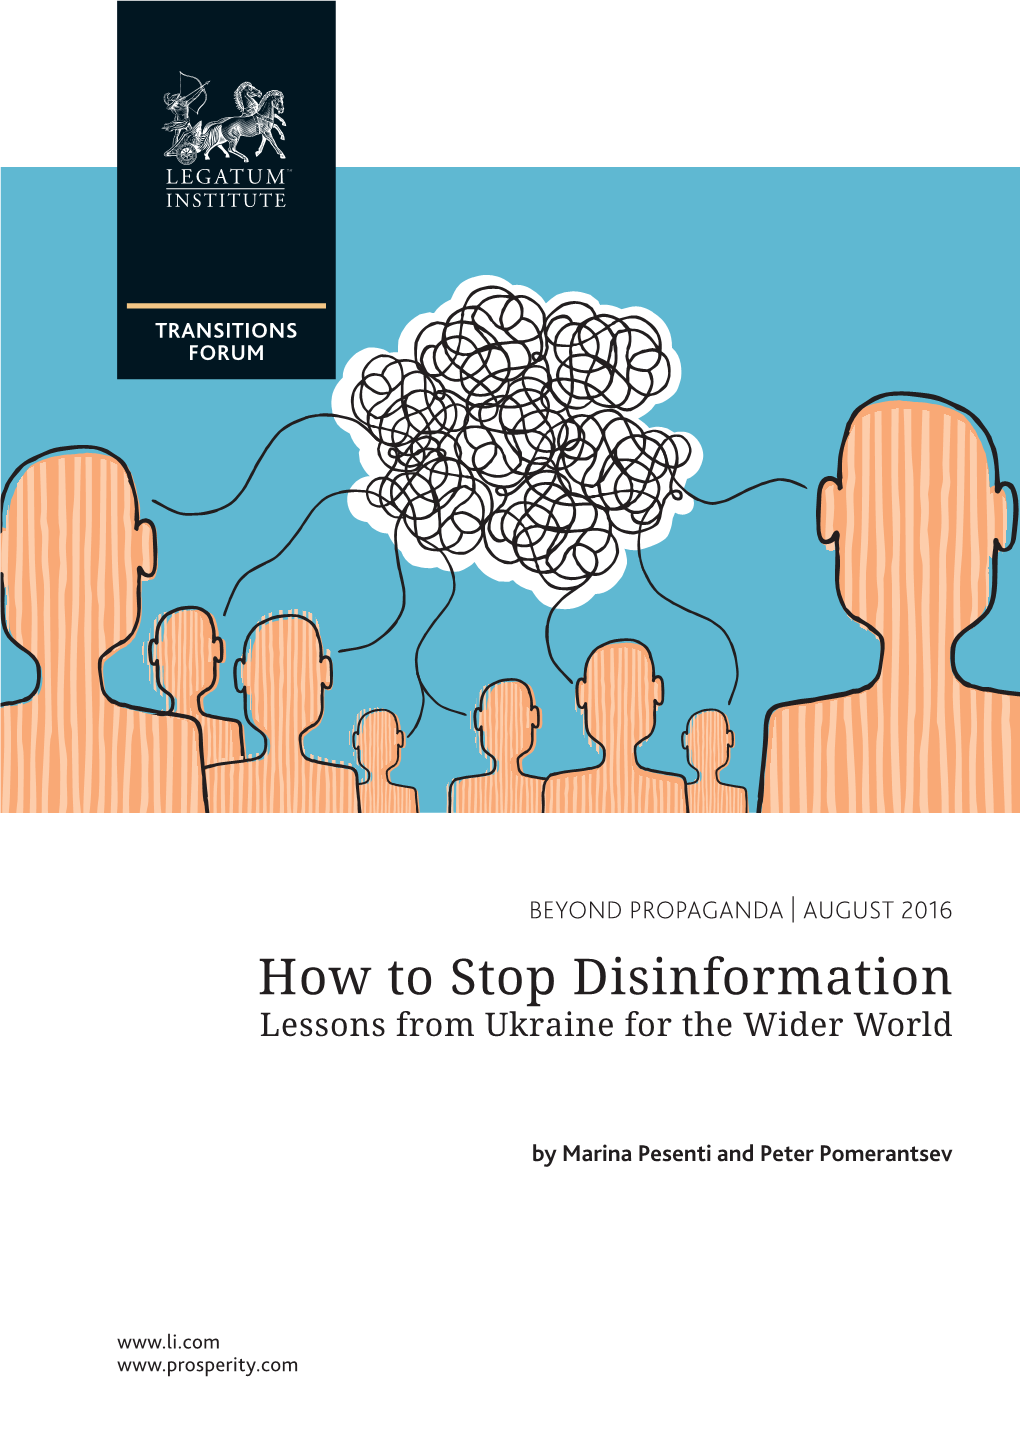 How to Stop Disinformation Lessons from Ukraine for the Wider World